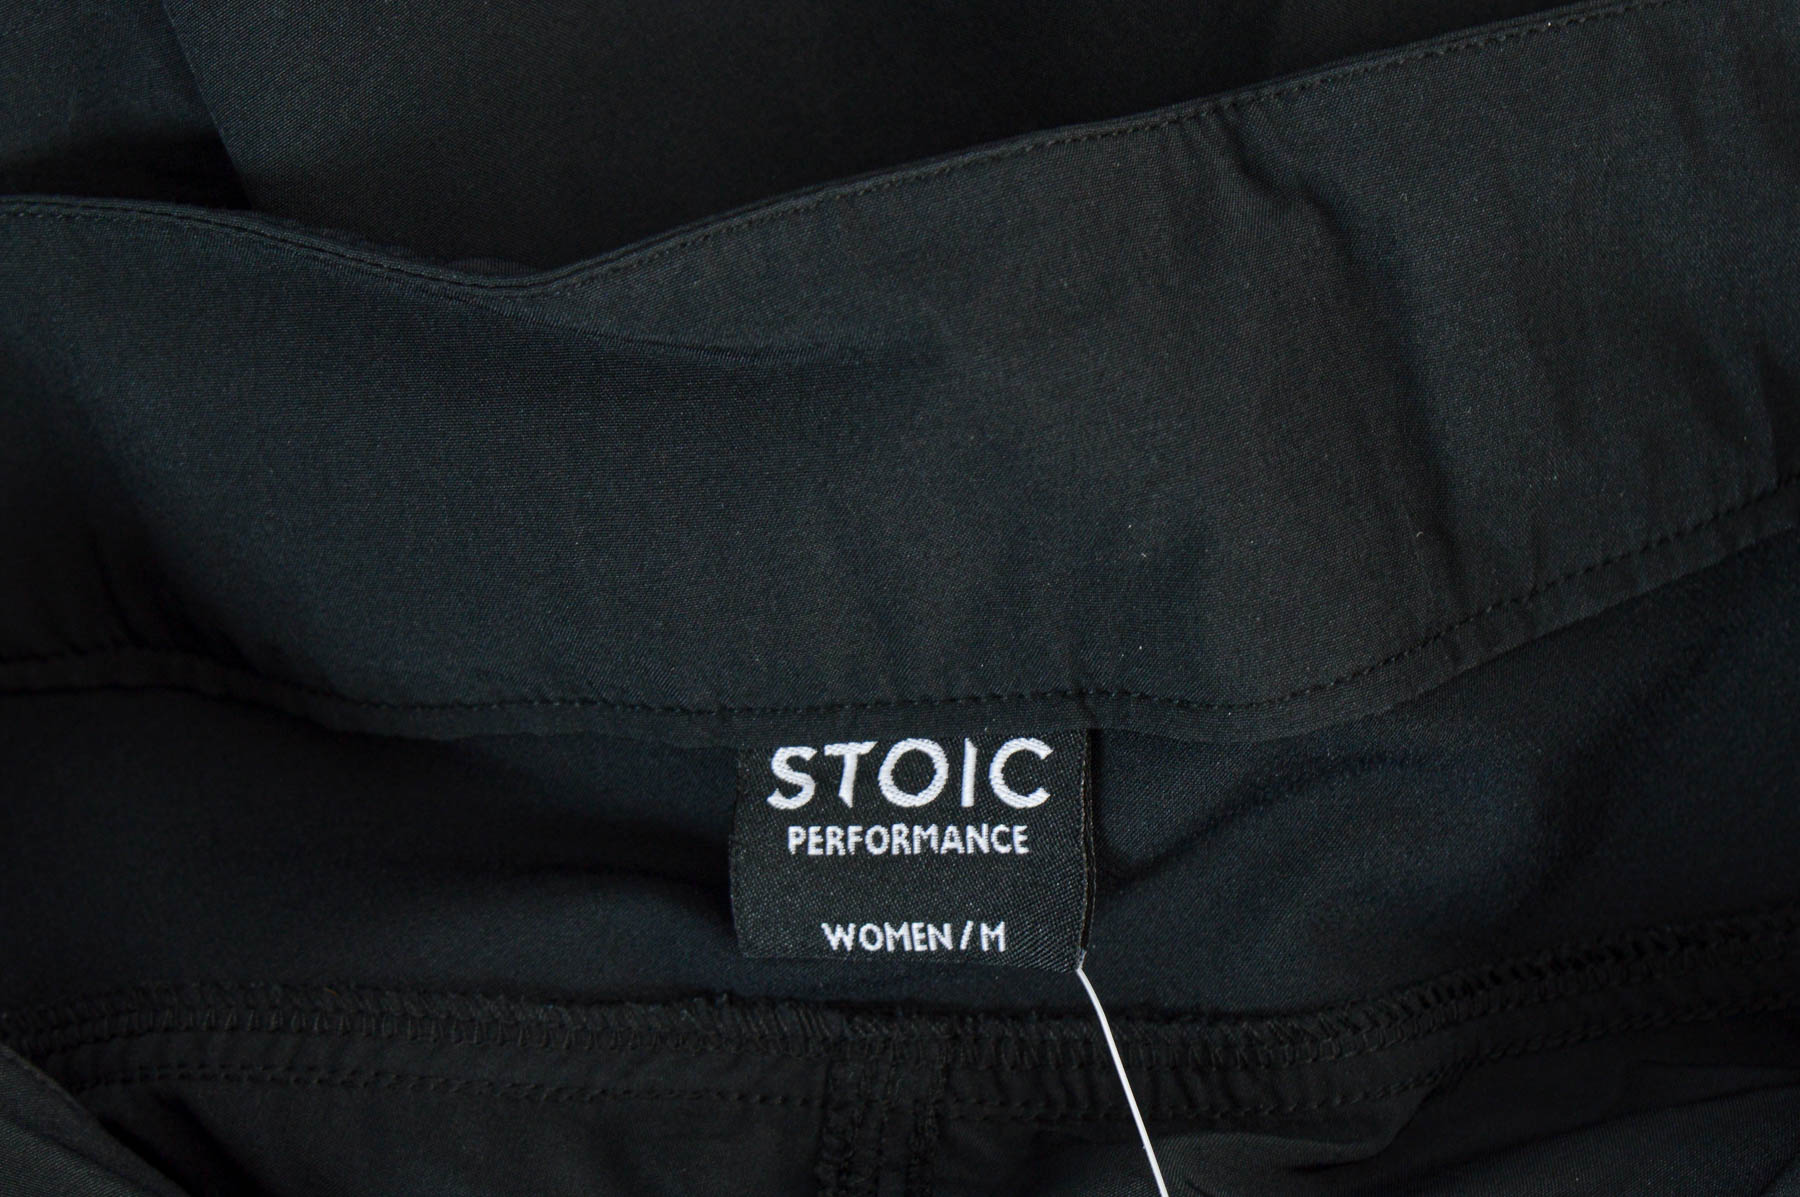 Female shorts for cycling - STOIC - 2